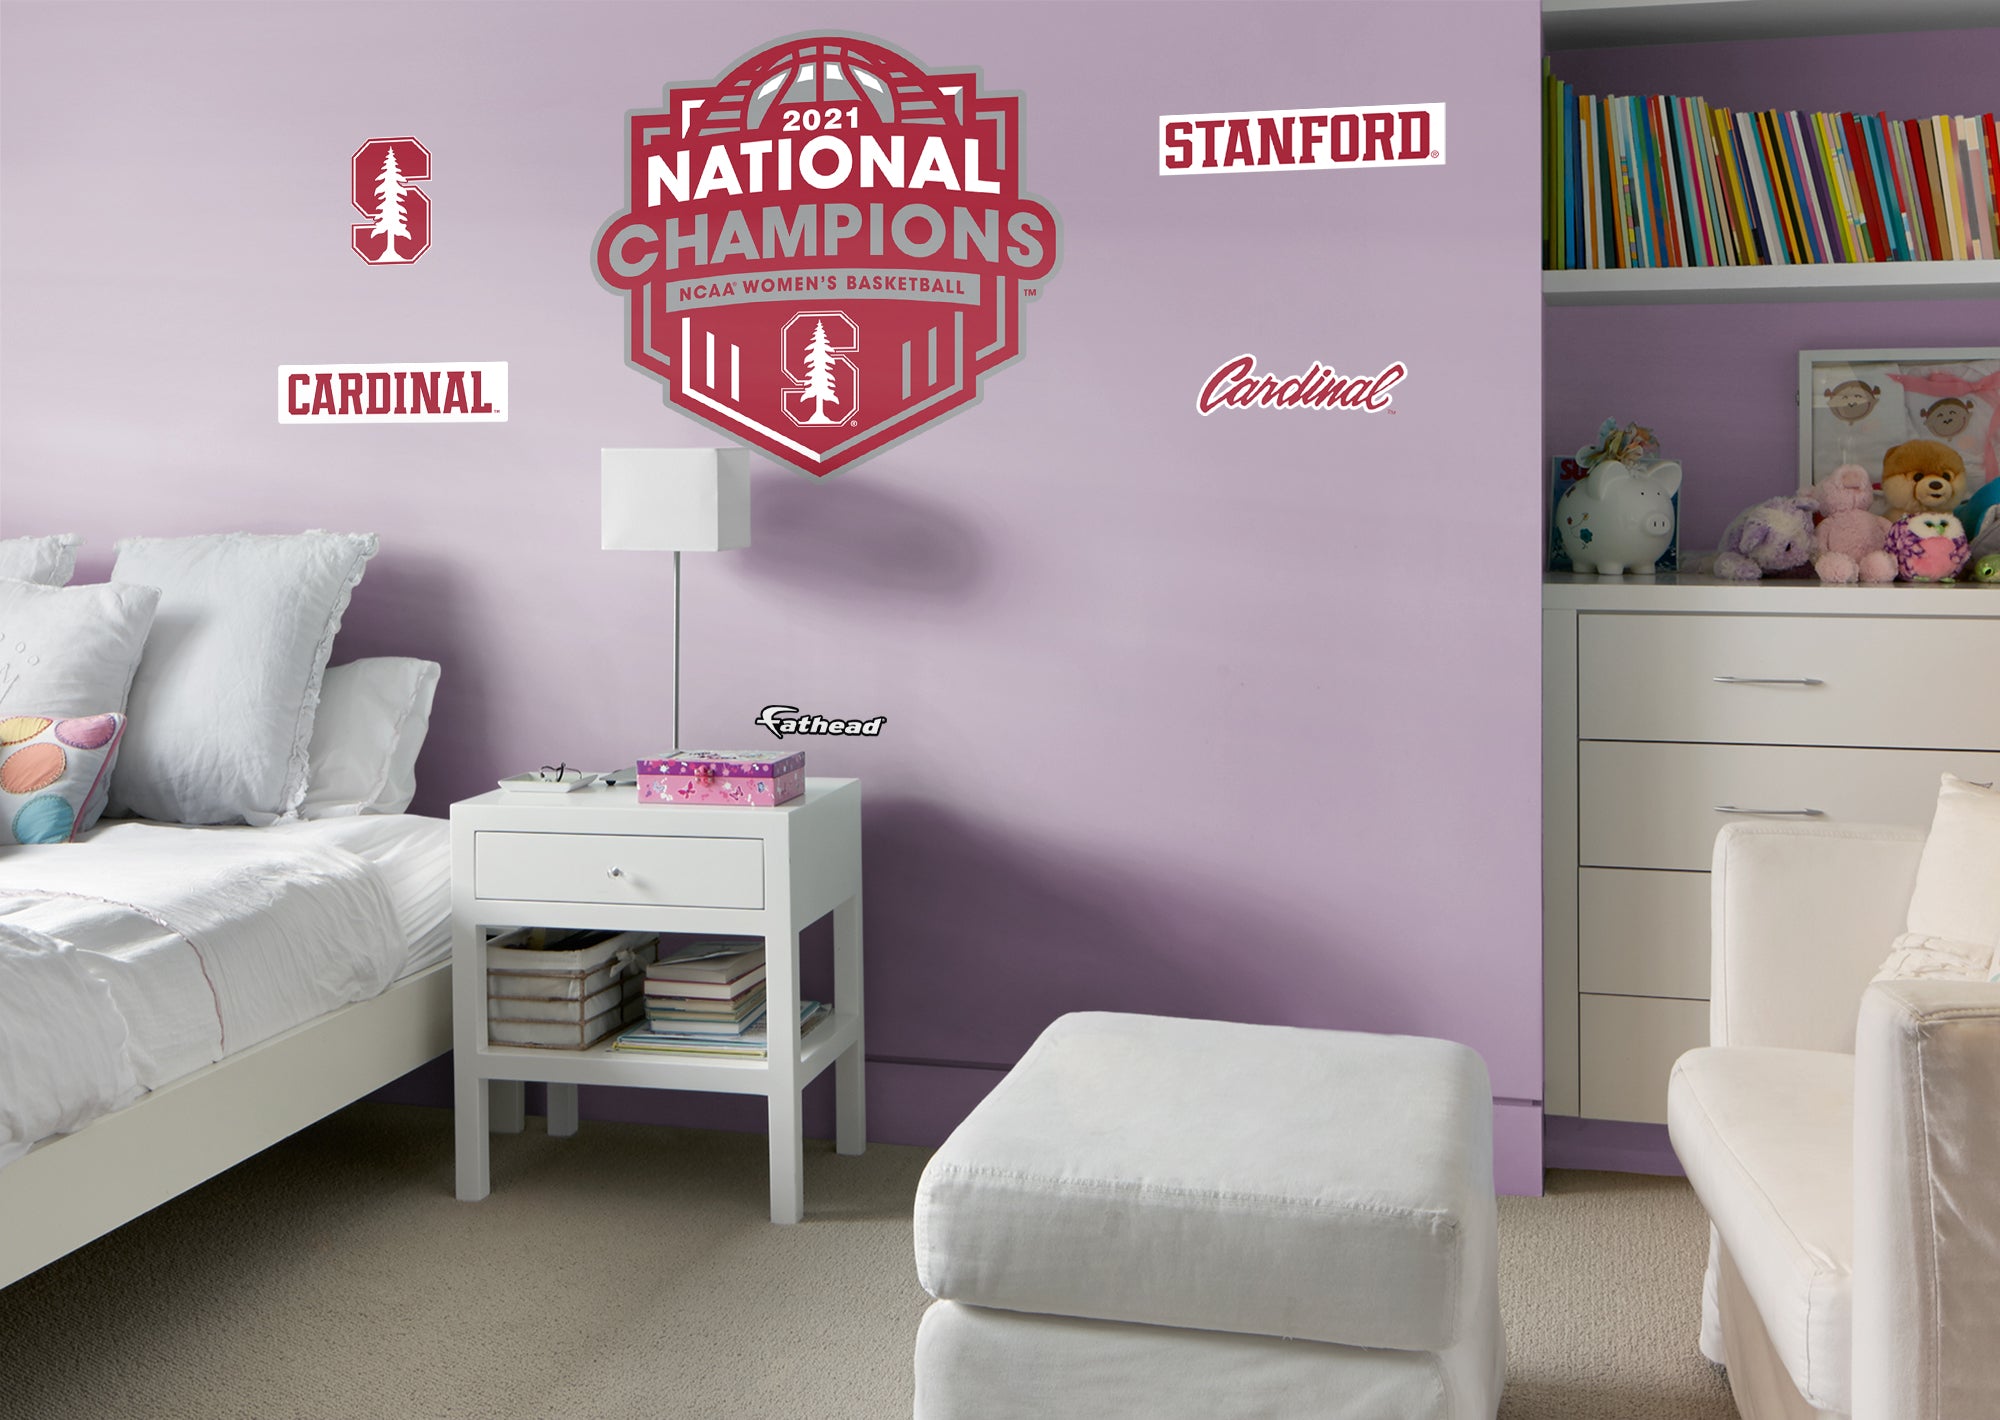 Stanford Cardinal 2021 Womens Basketball Champions Logo - Officially Licensed NCAA Removable Wall Decal Giant Logo + 5 Decals (4